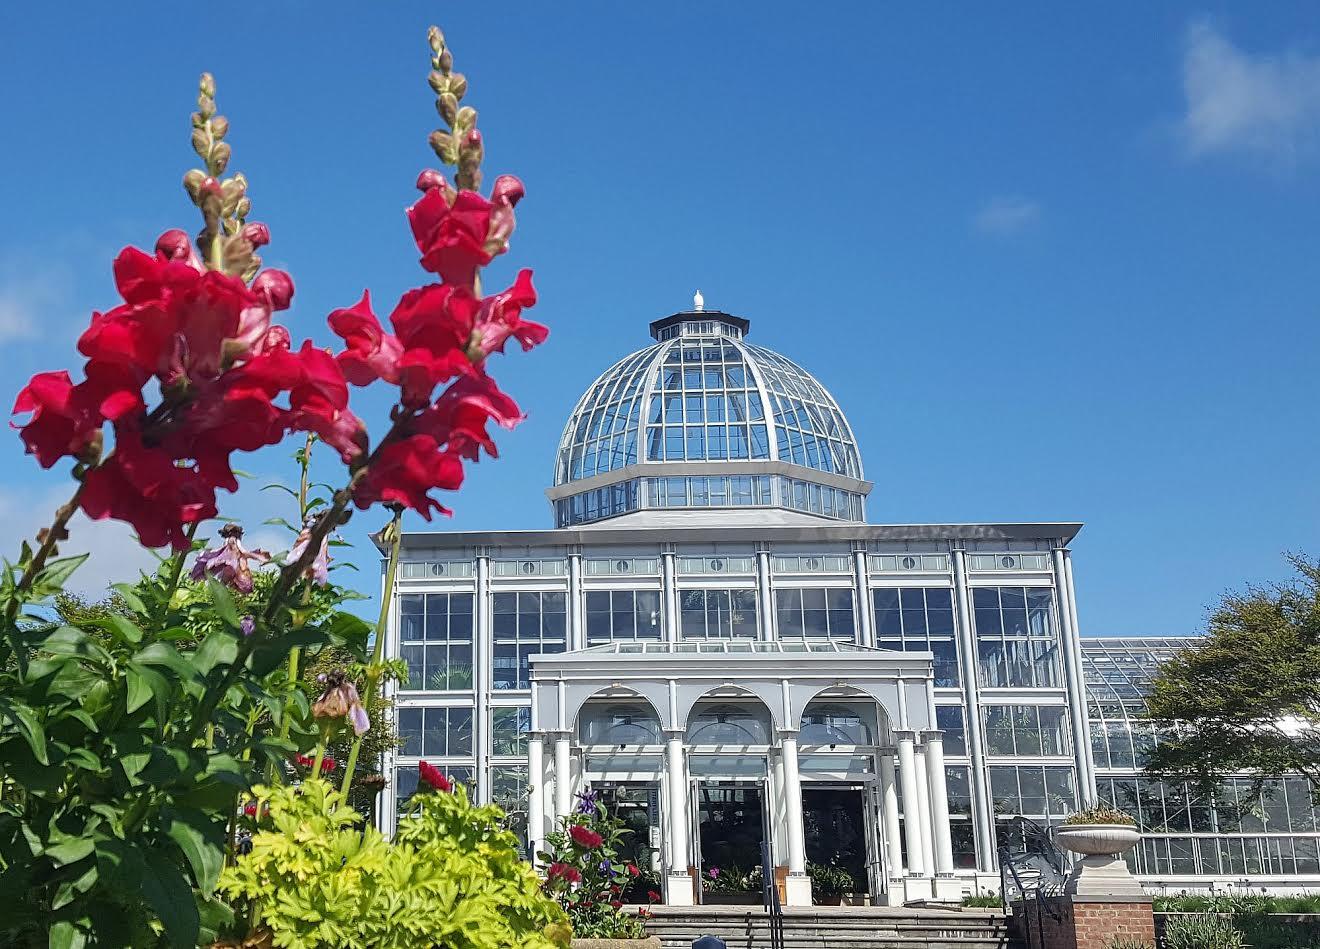 Lewis Ginter Botanical Garden (Photo by Cathy Hoyt)